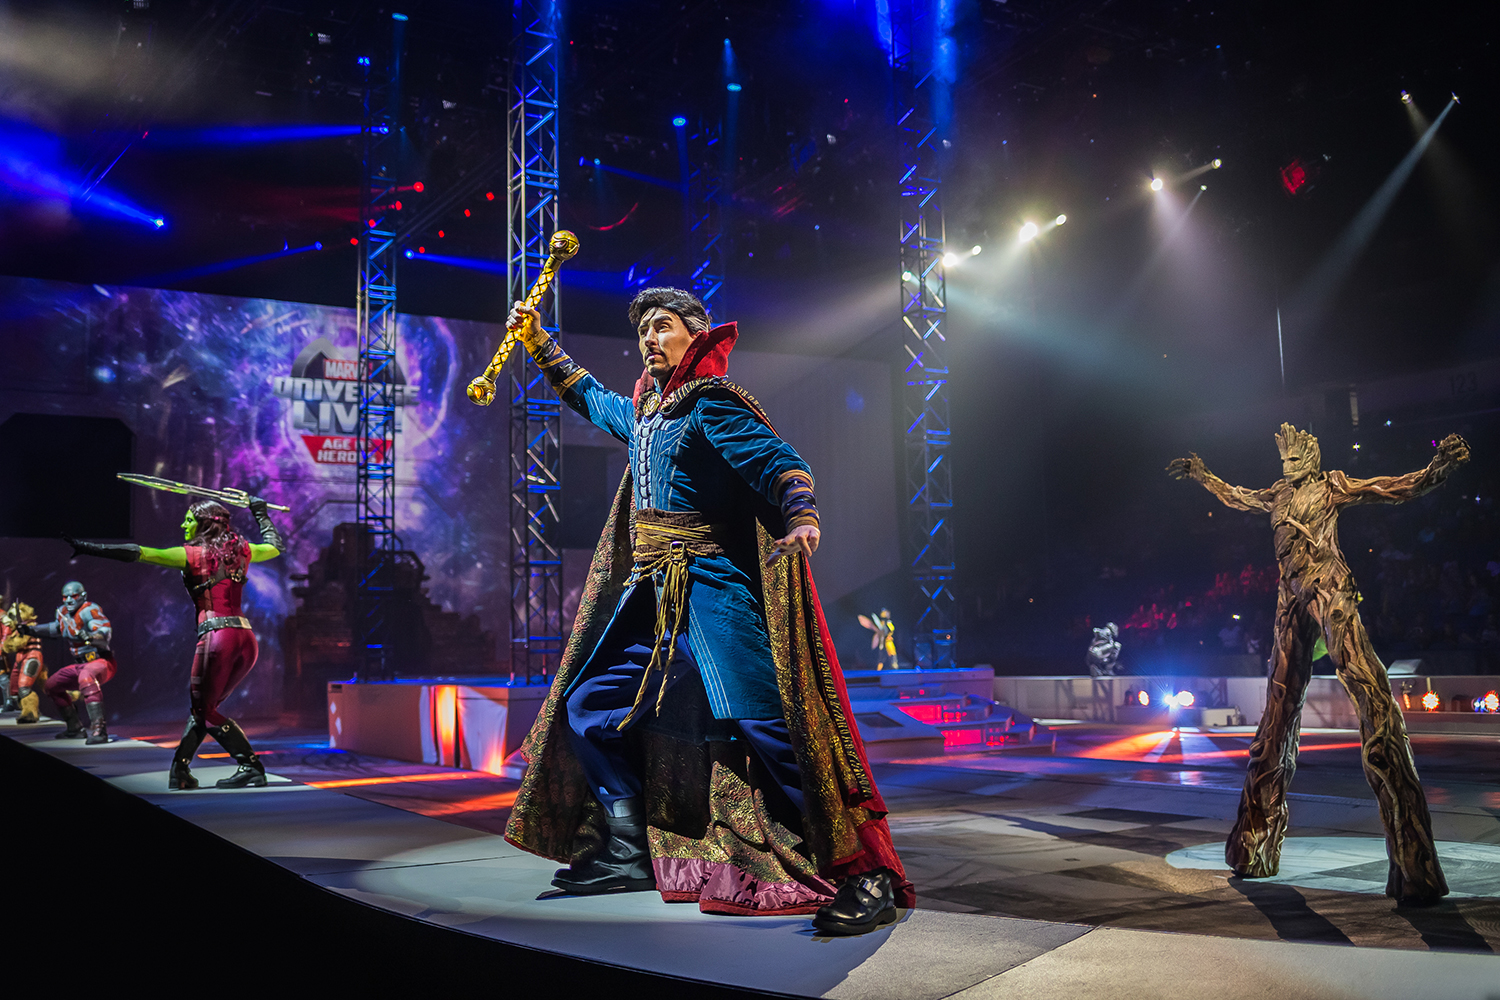 marvel universe live circus age of heroes on stage 6